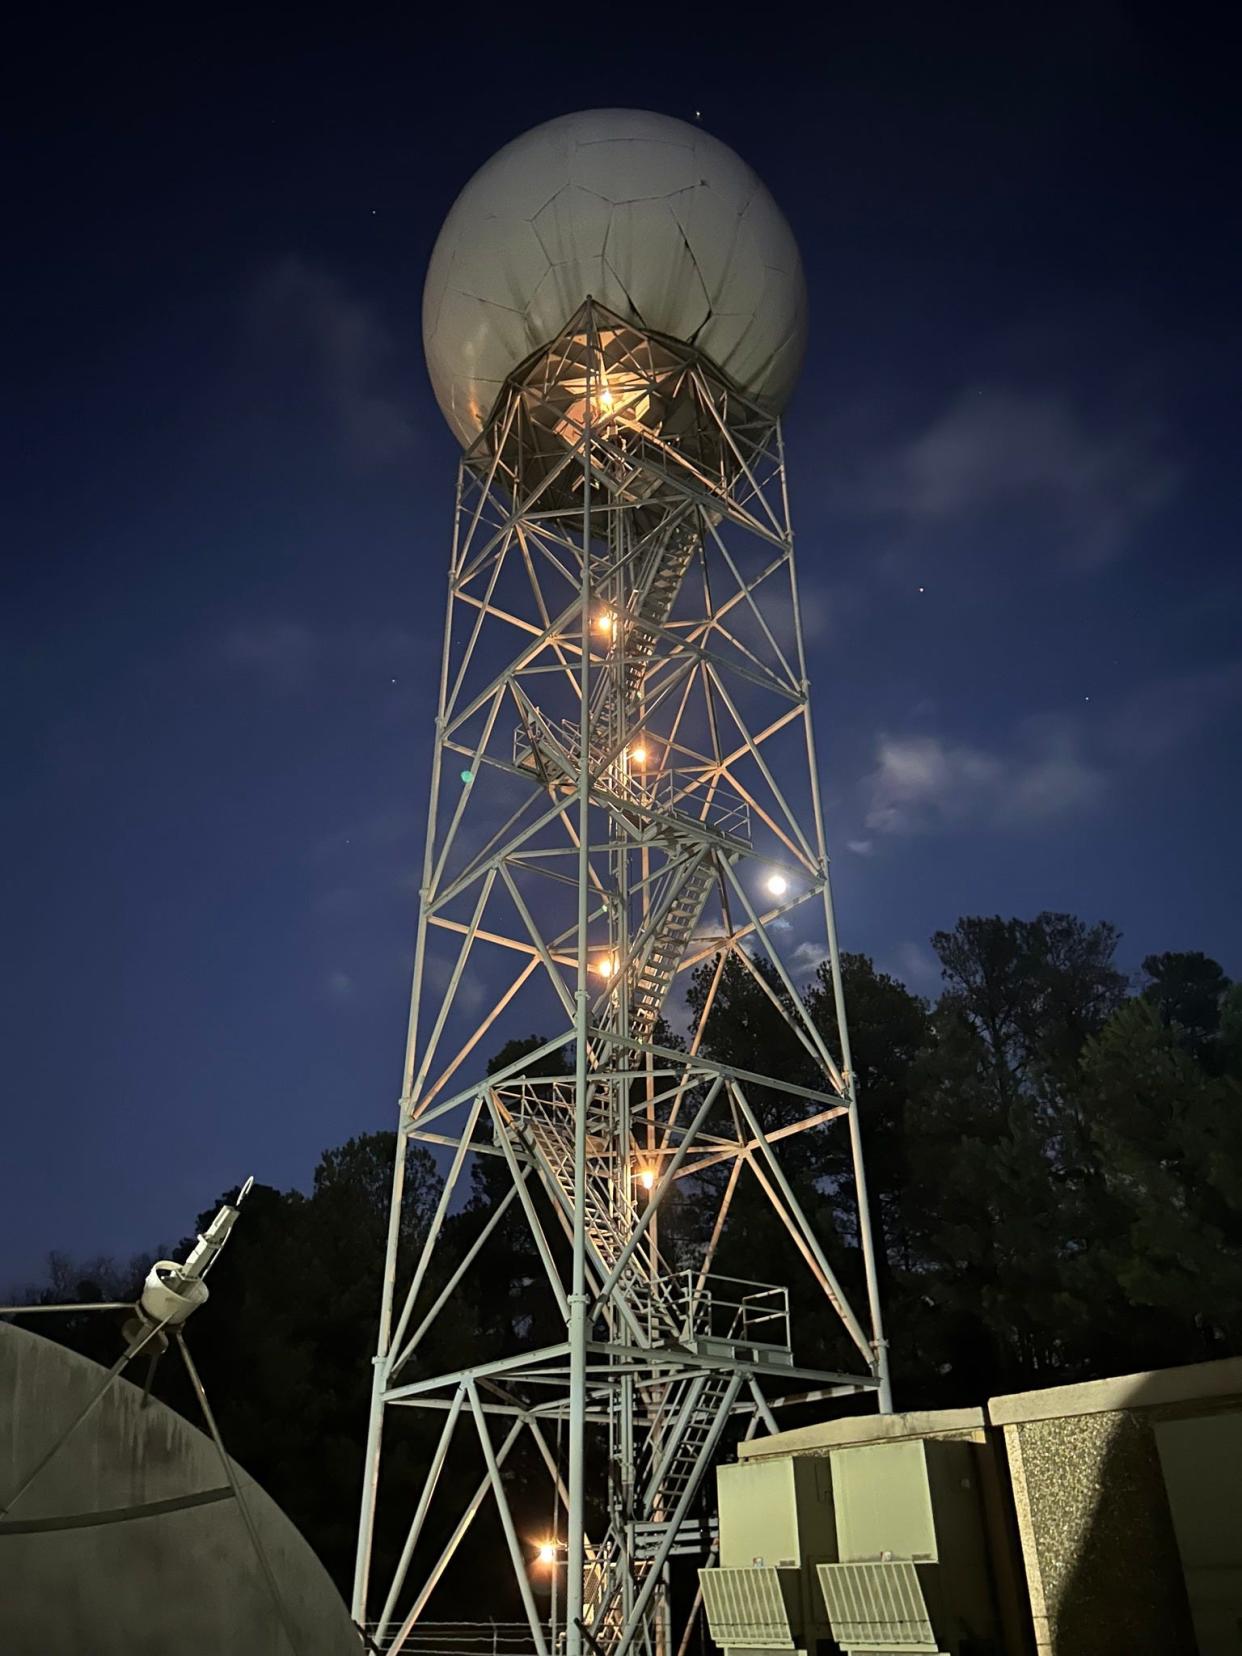 A radar tower at the US National Weather Service Greenville-Spartanburg airport location is currently offline after a gear that turns the antenna broke. The tower provides real-time weather data to most of Western North Carolina.